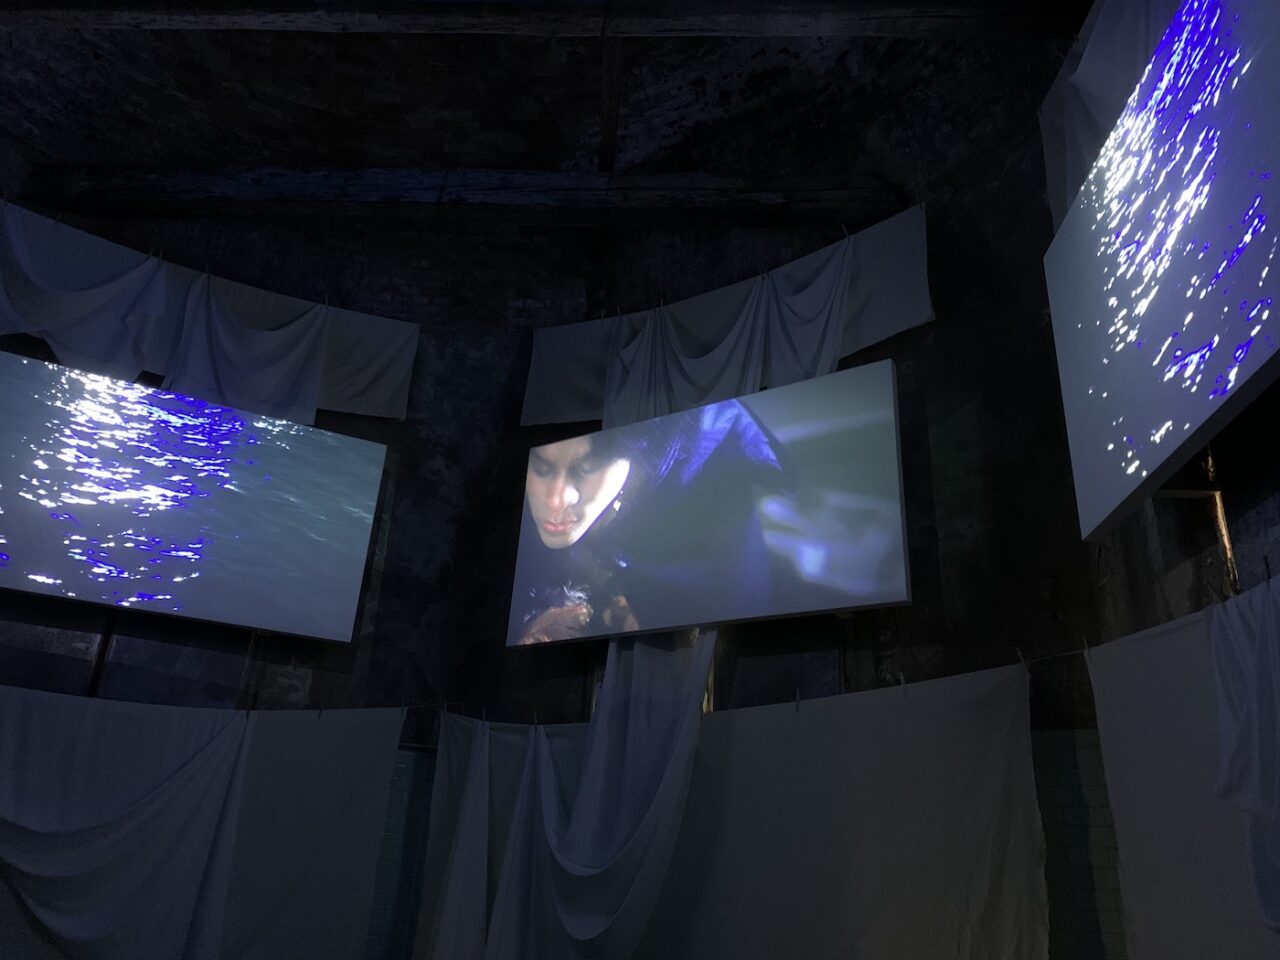 Tourmaline, Mary of III Fame, 2020-2021. Installation View of “The Milk of Dreams” at Arsenale. Photo: C&